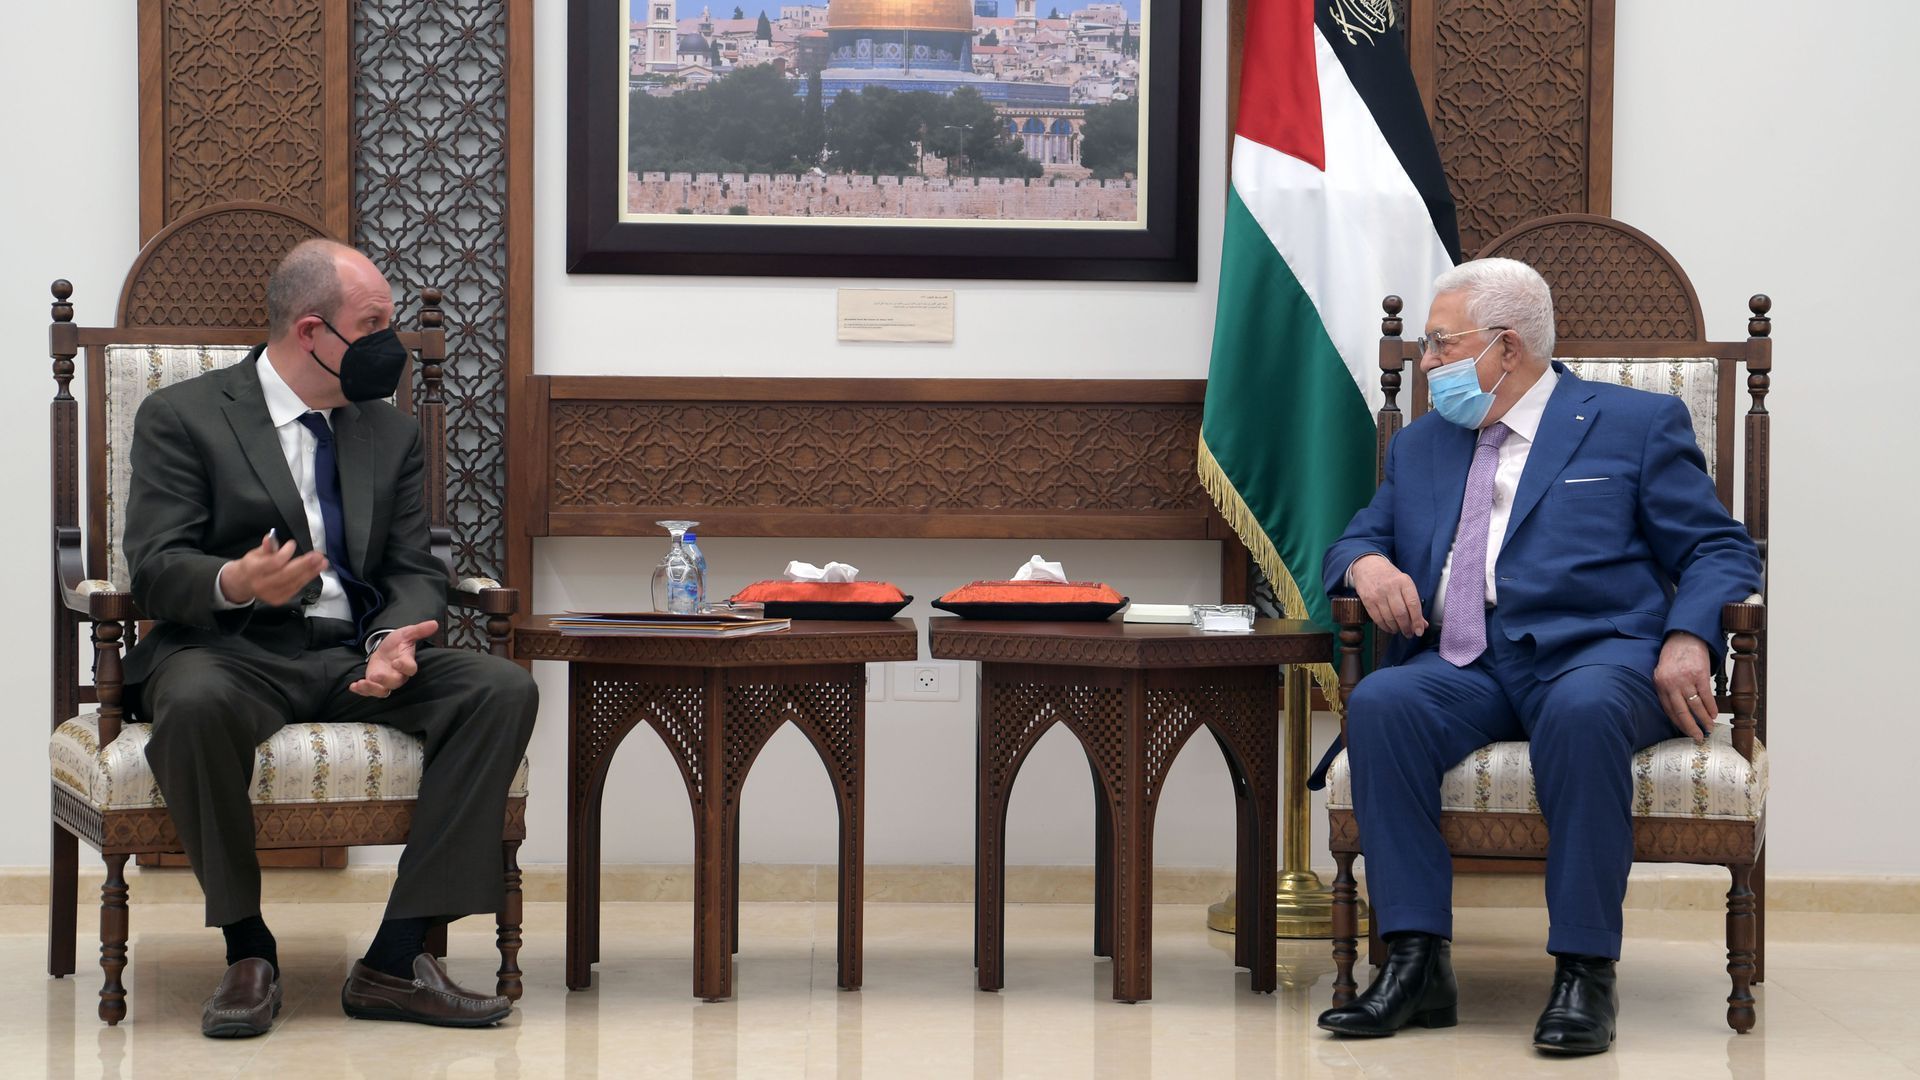 Palestinian President Mahmoud Abbas (R) meets Hady Amr (L) in the occupied West Bank city of Ramallah on May 17, 2021. Photo: Handout/Palestinian Presidency/Anadolu Agency via Getty Images)